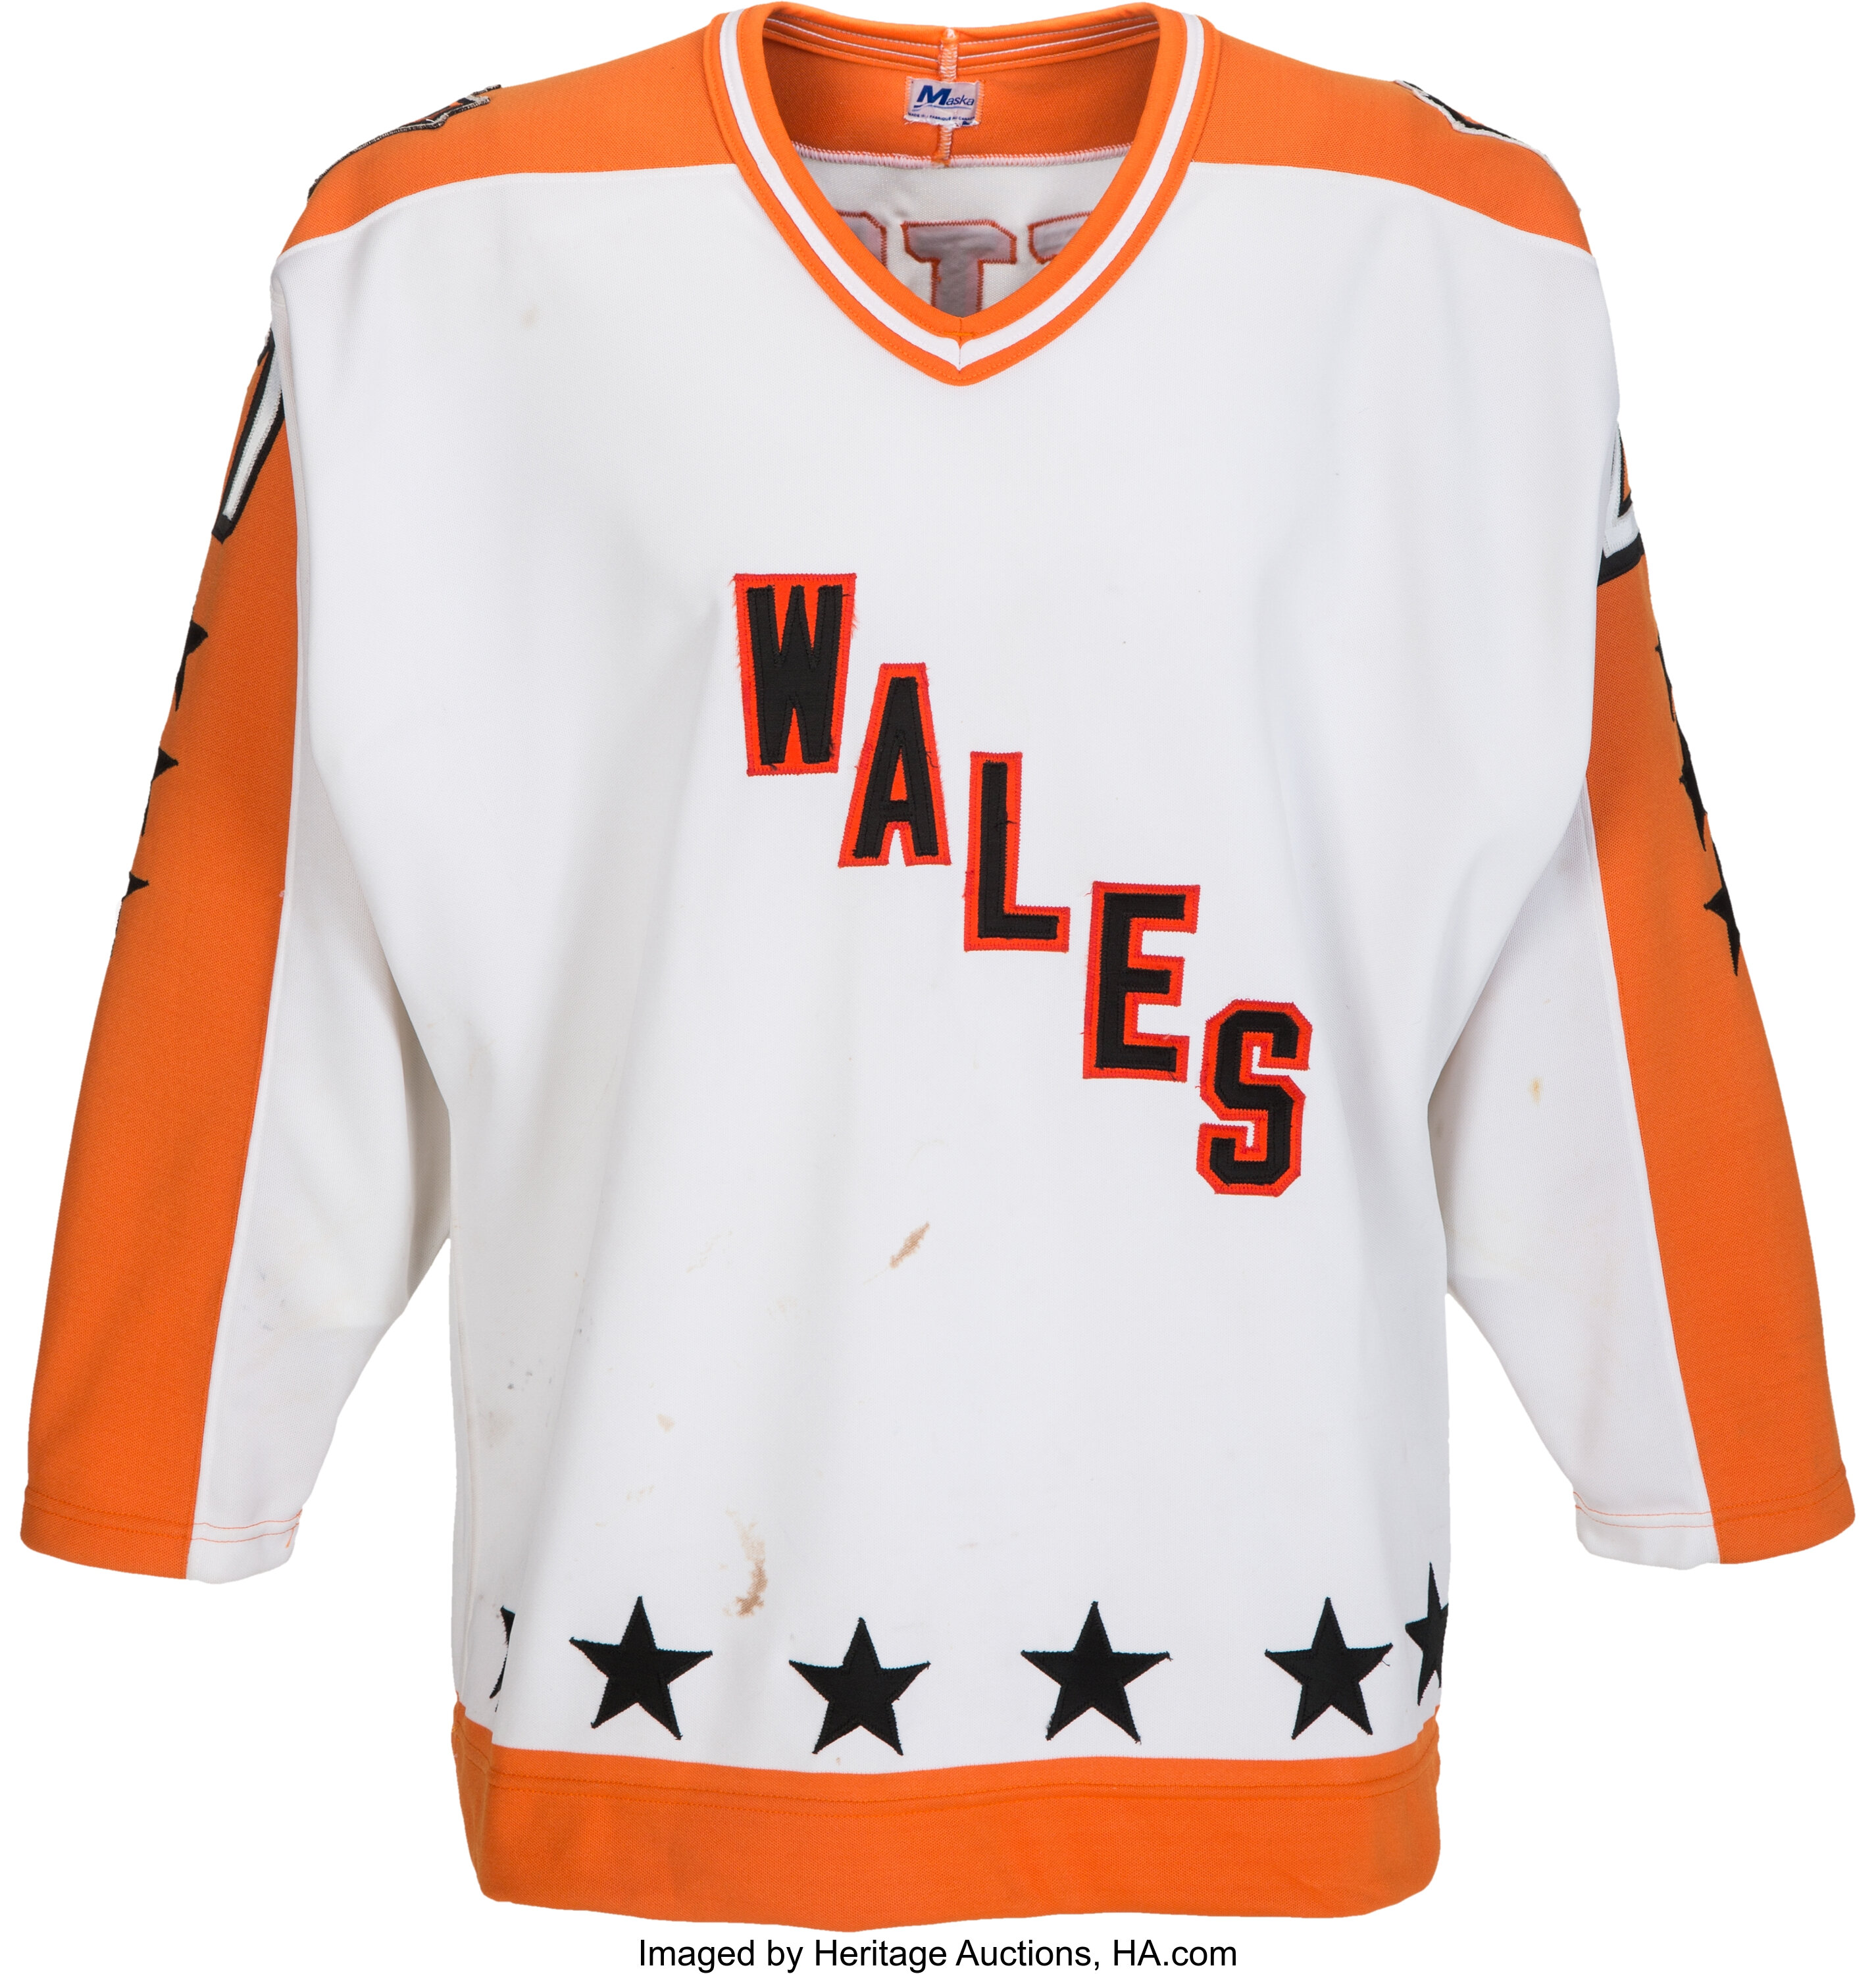 NHL releases jersey designs for the 2017 All-Star Game